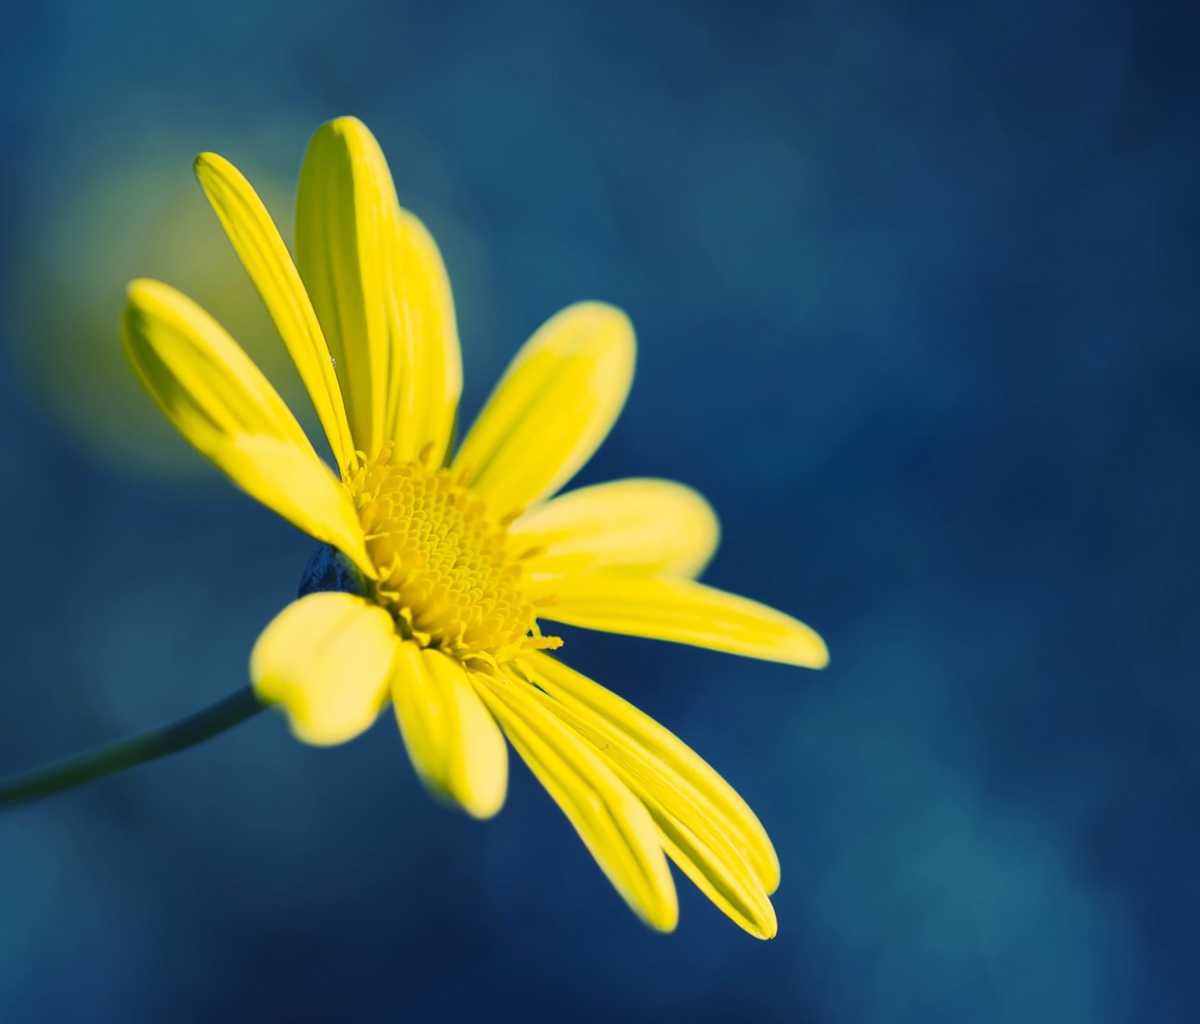 Yellow Flower On Blue Background wallpaper 1200x1024